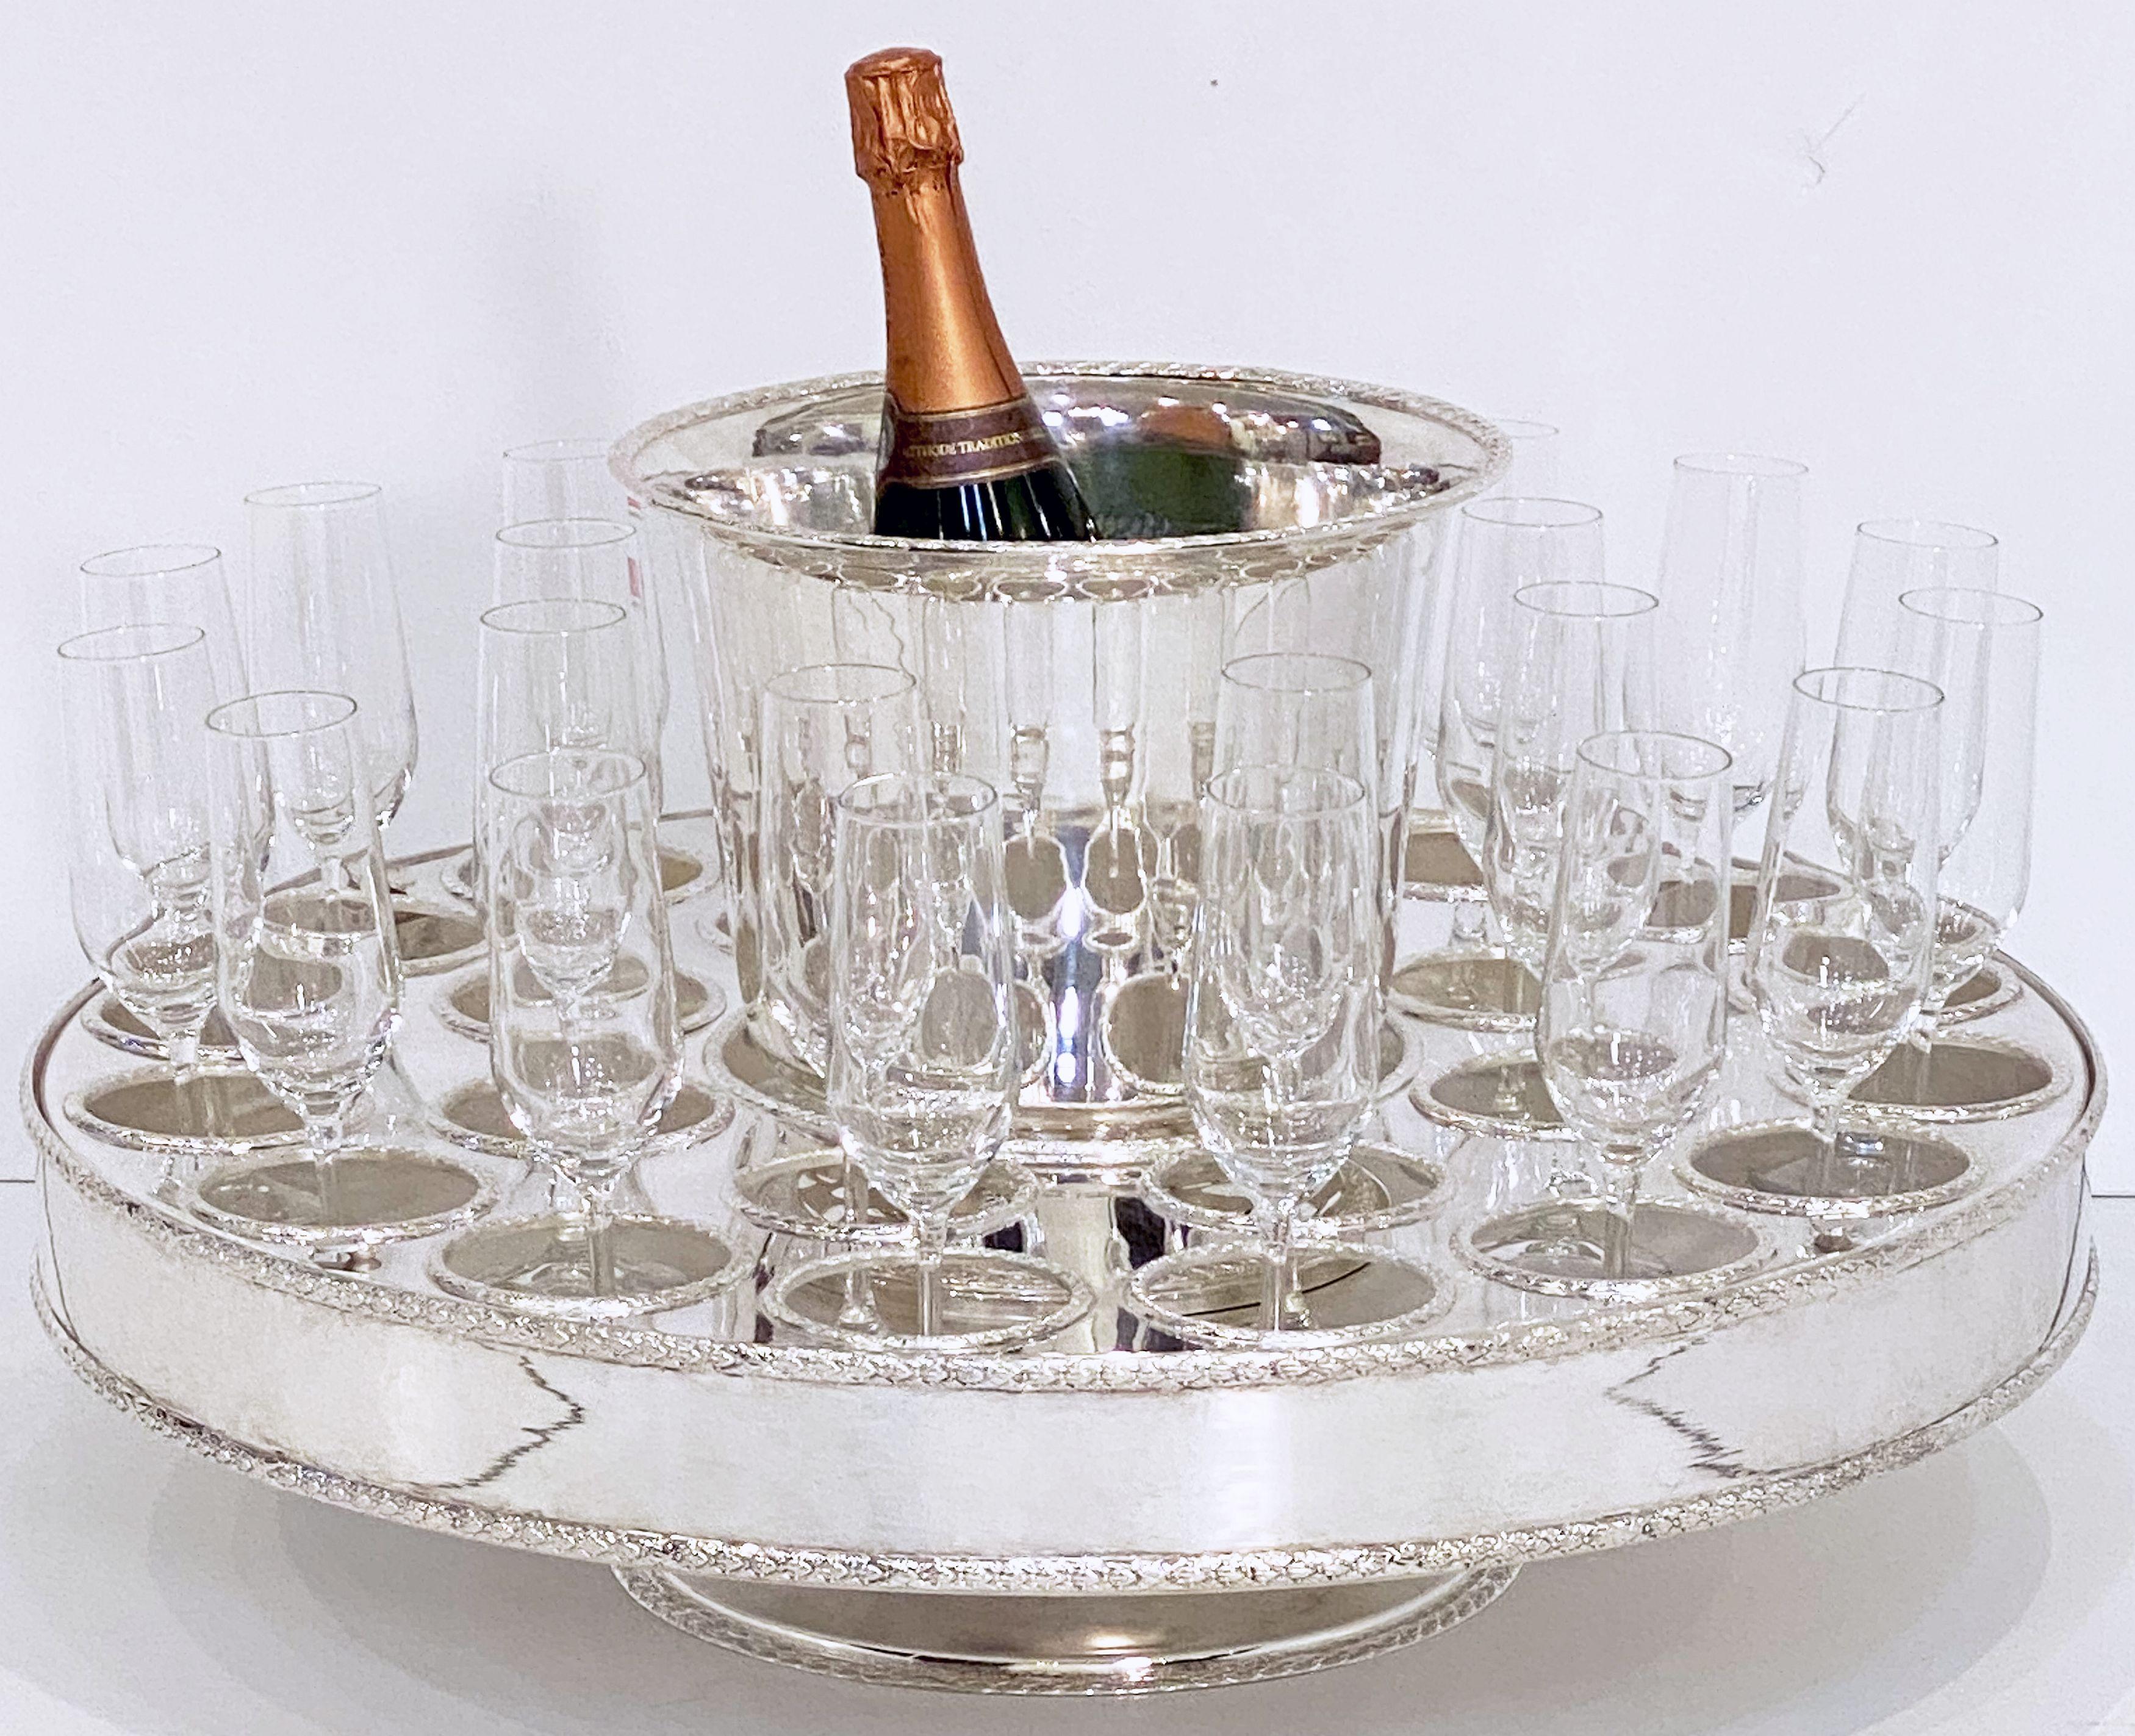 Italian Silver Champagne Service with Revolving Stand, Wine Cooler, and Glasses 8